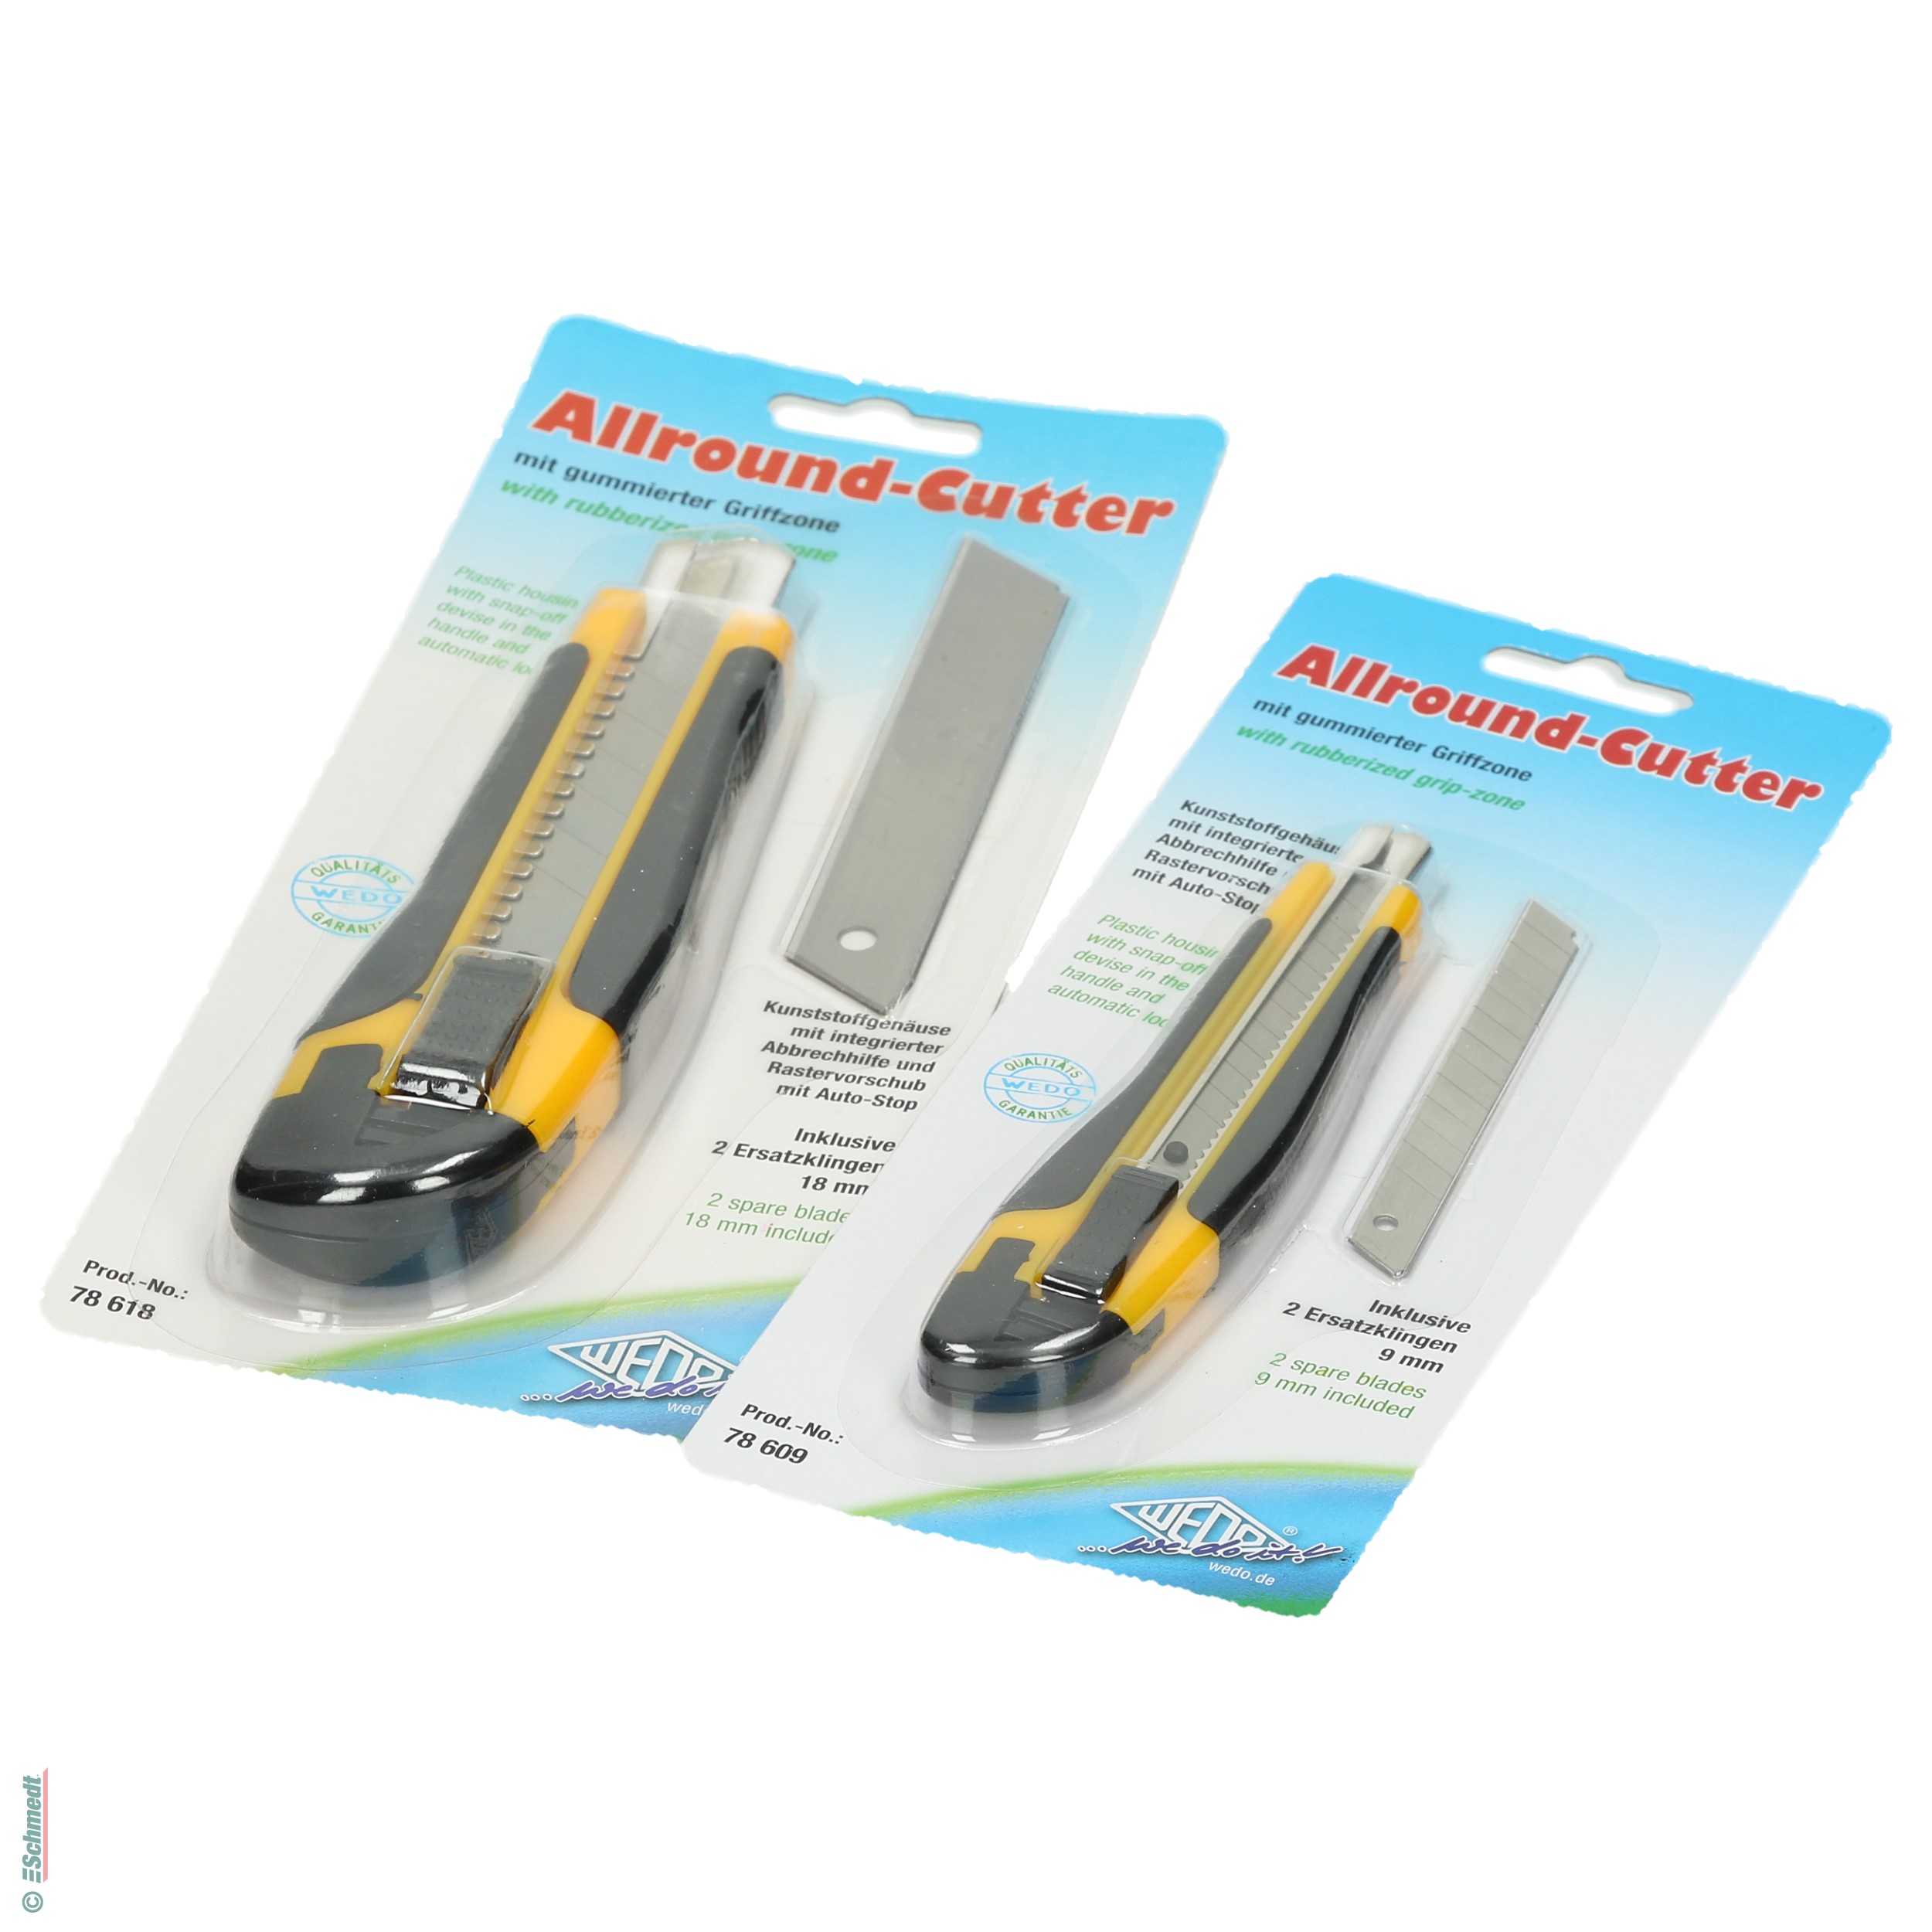 Professional Soft-Cut cutter - with soft grip - for cuts into cardboard, paper, adhesive tapes, rubber etc.... - image-1